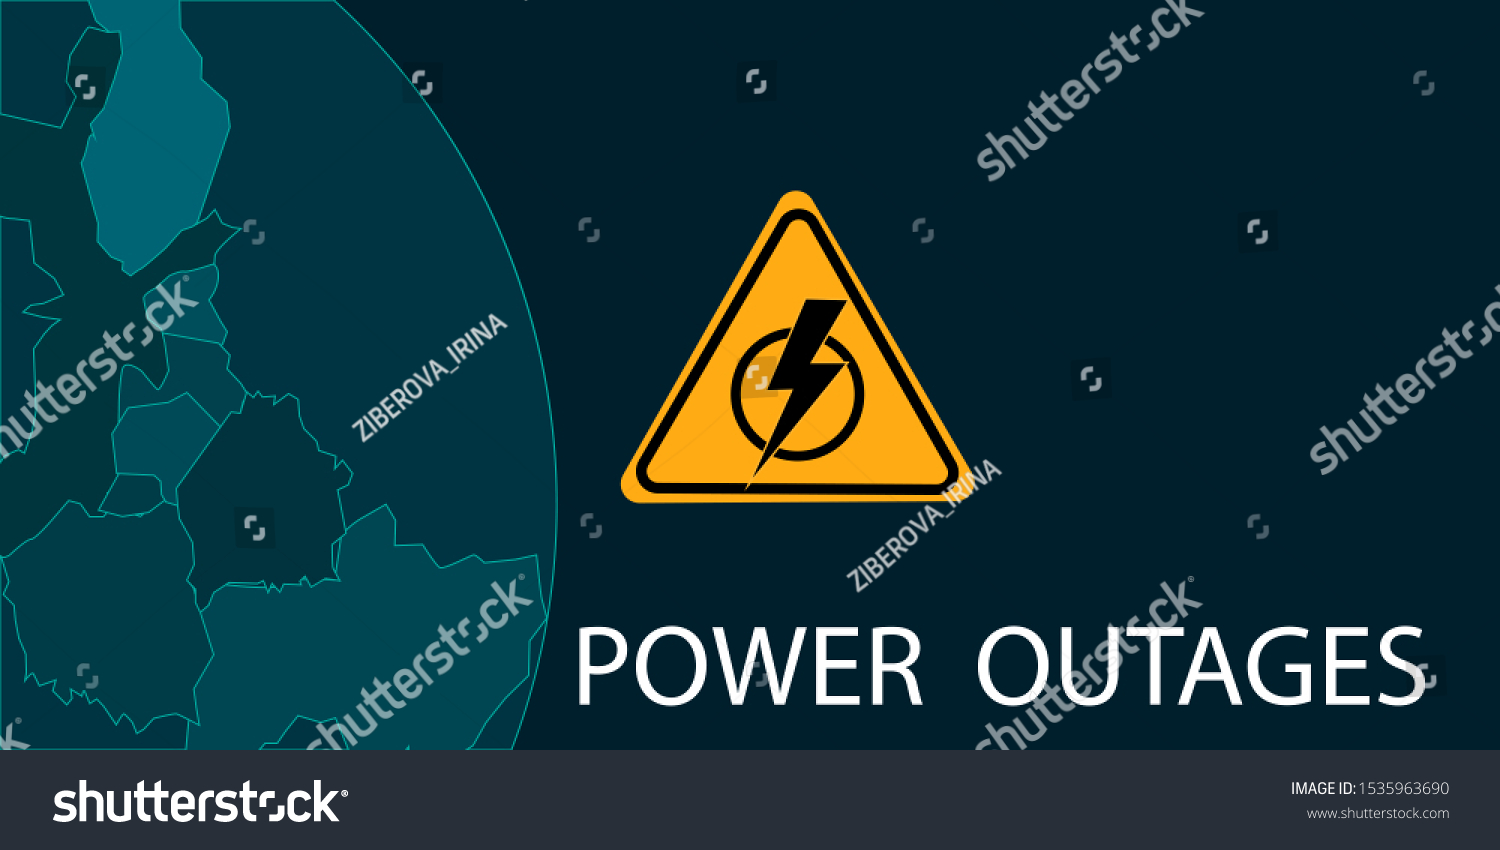 Power outage, logo on the background of the planet without electricity.Vector illustration. #1535963690